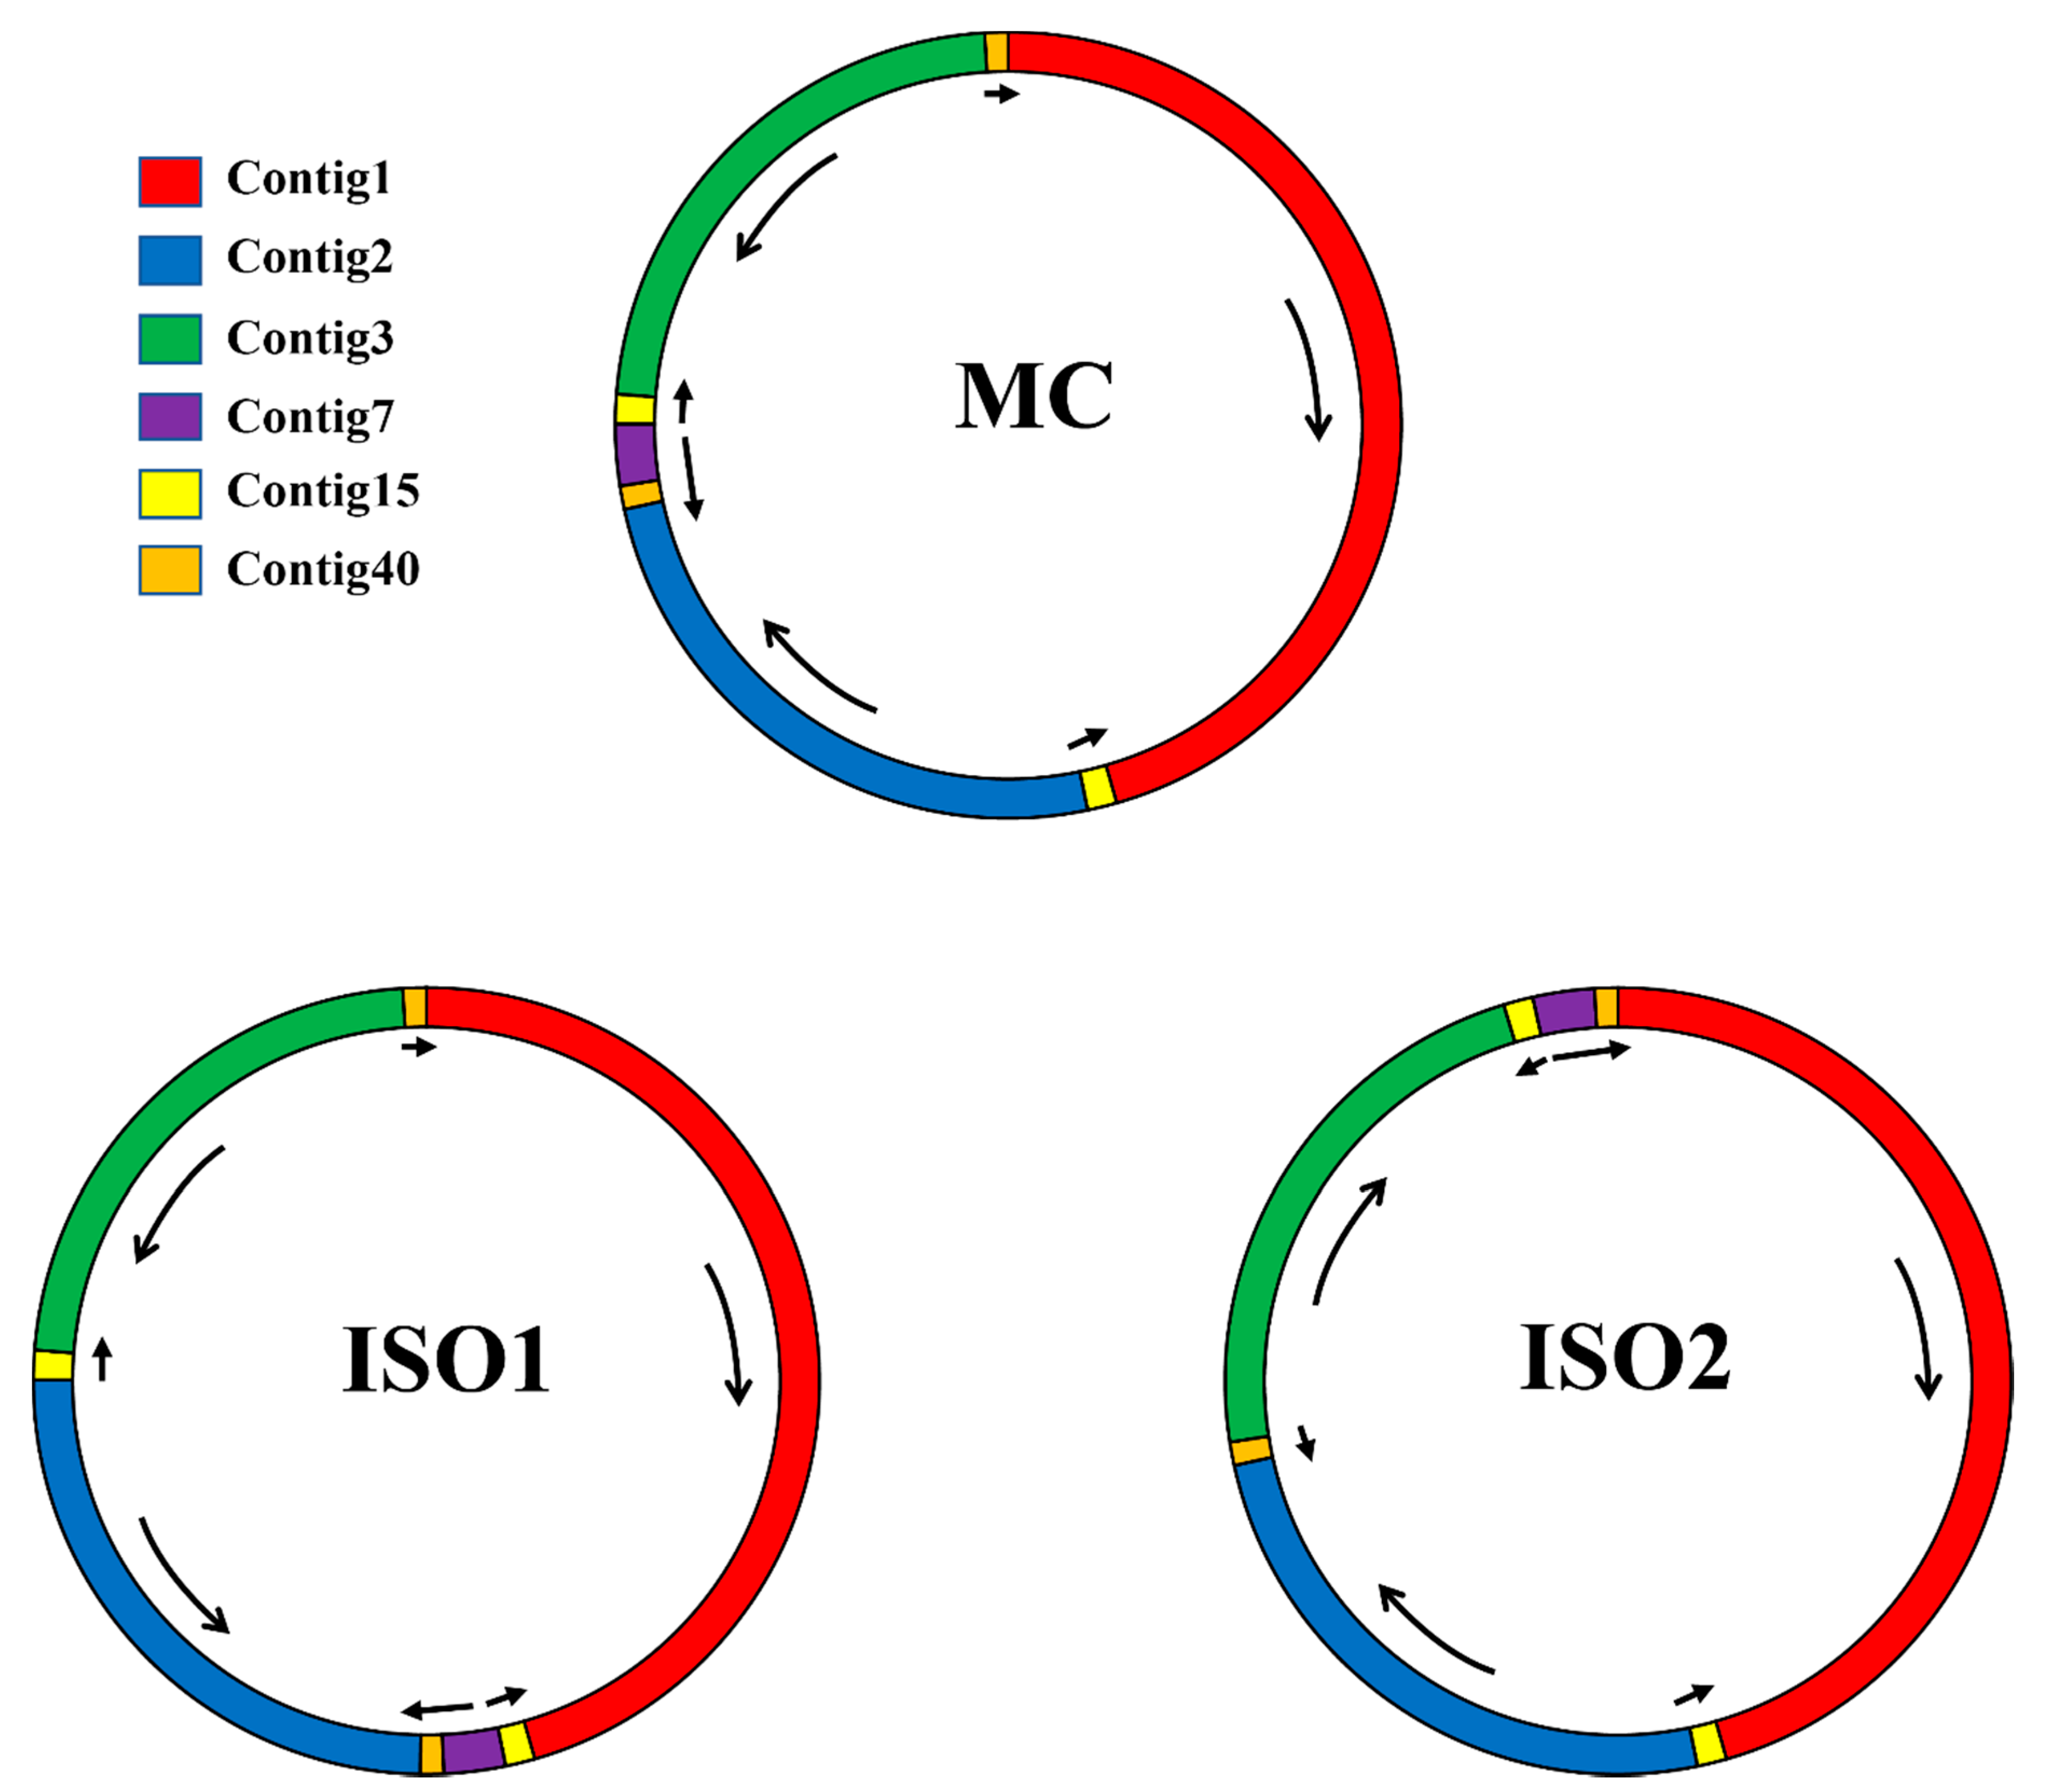 Mitogenome-wise codon usage pattern from comparative analysis of